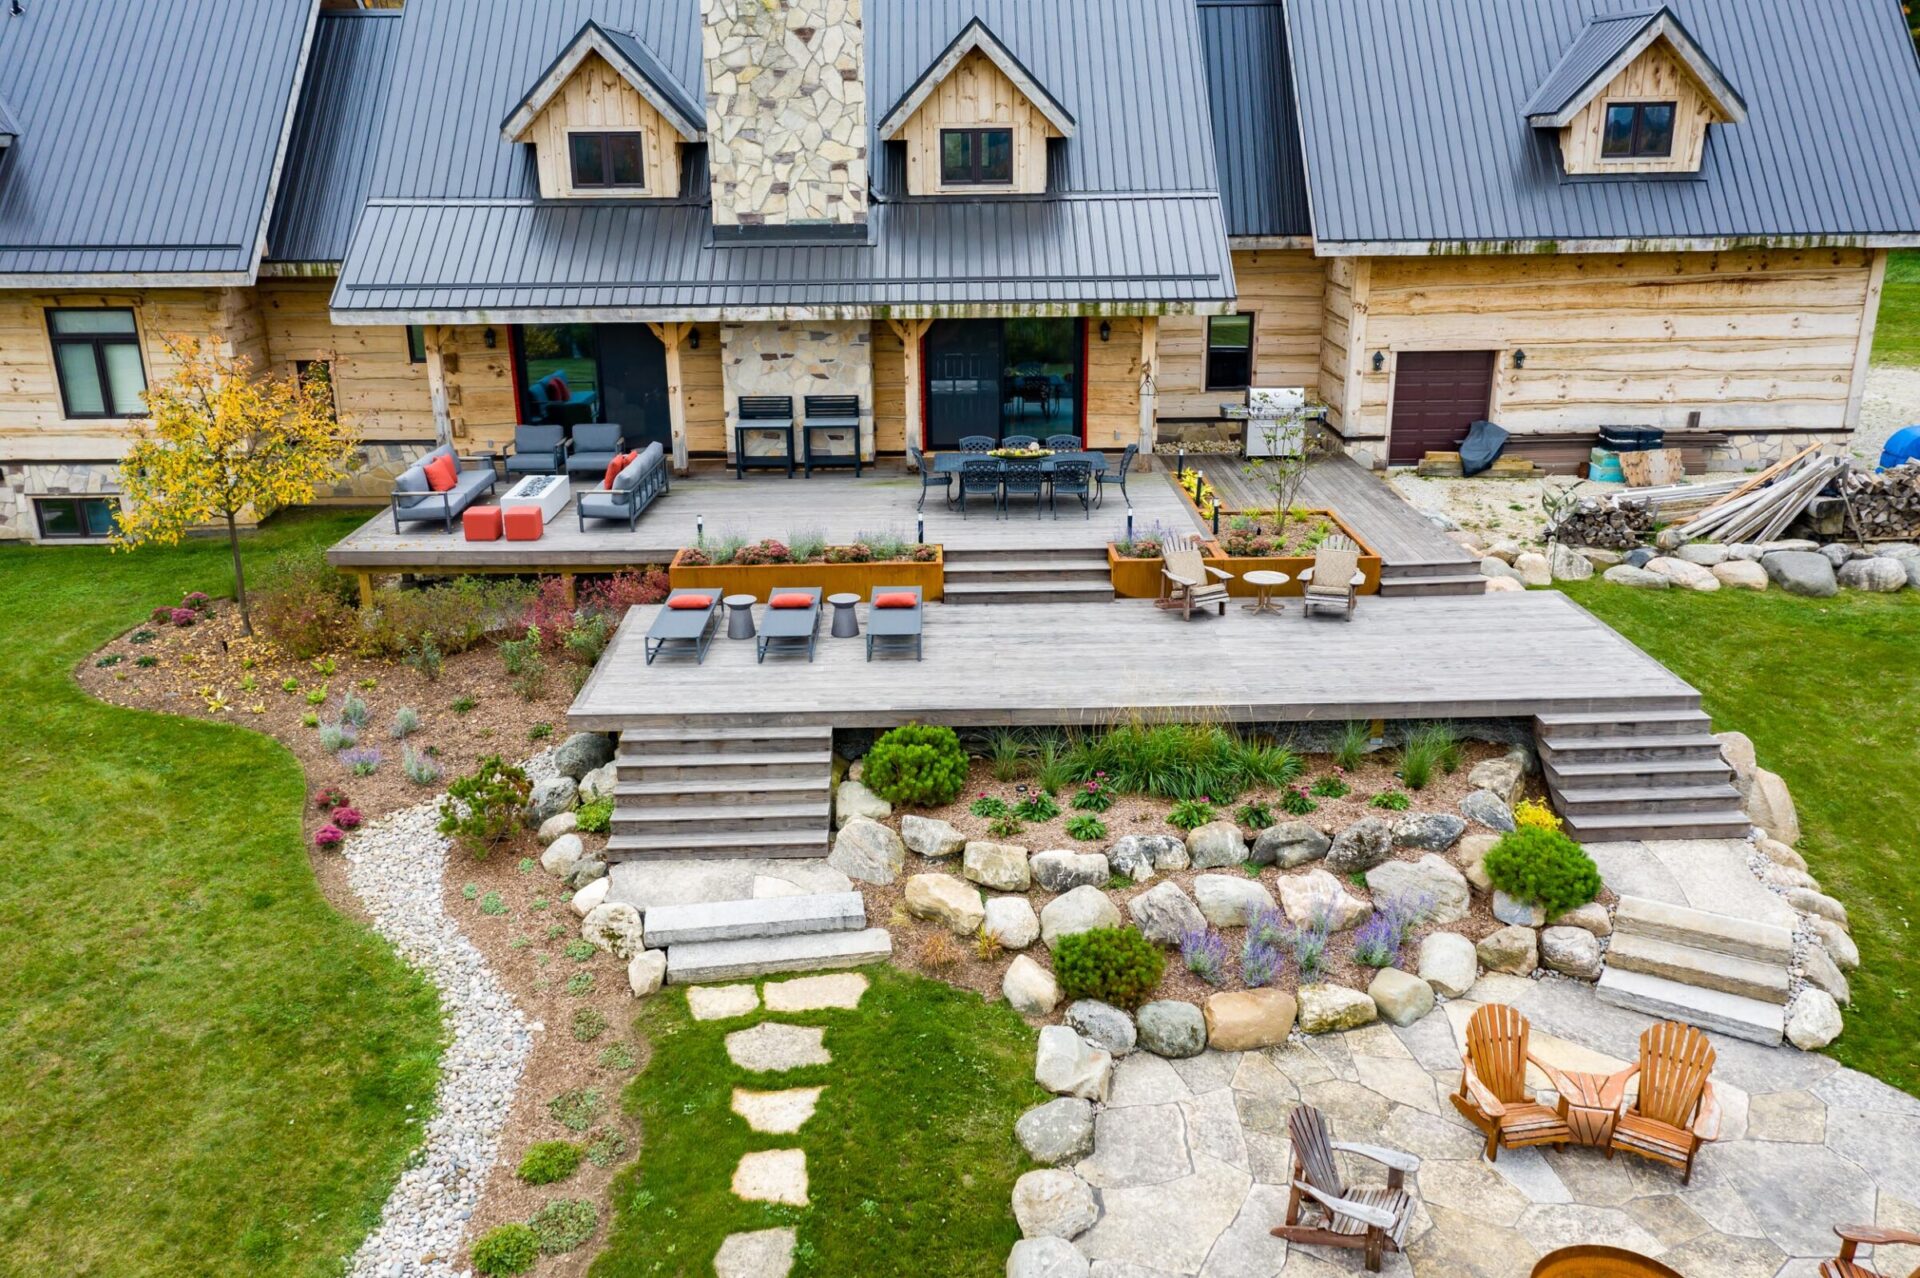 This image shows a rustic log cabin with a modern outdoor terrace, a stone fire pit area, lush landscaping, and cozy patio furniture.